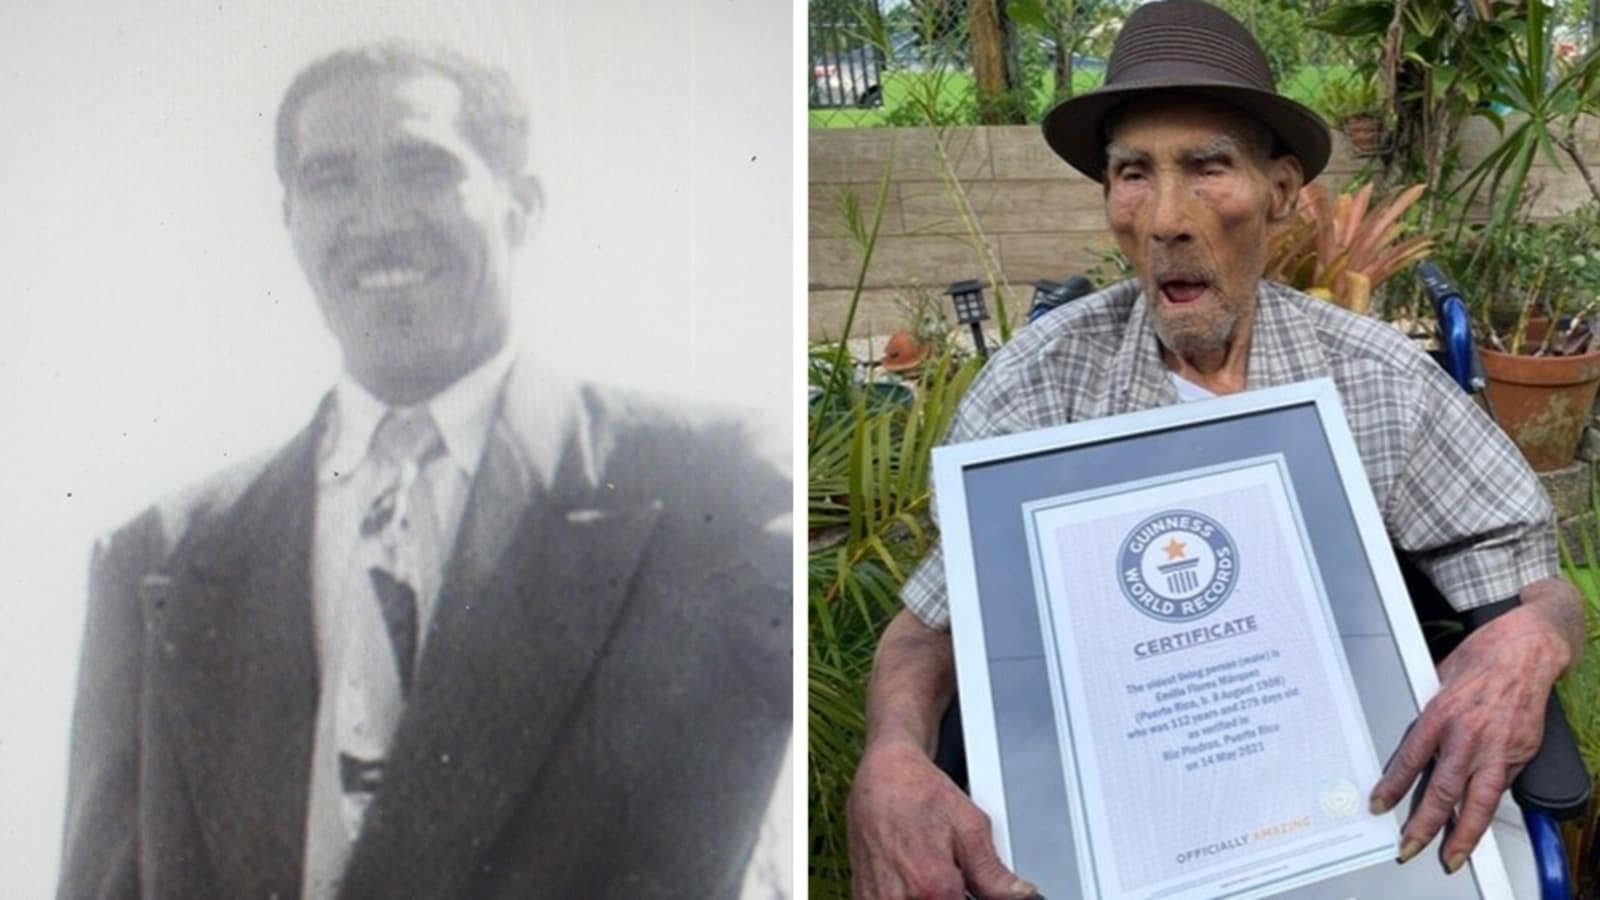 Emilio Marquez sets Guinness world record as the oldest man alive